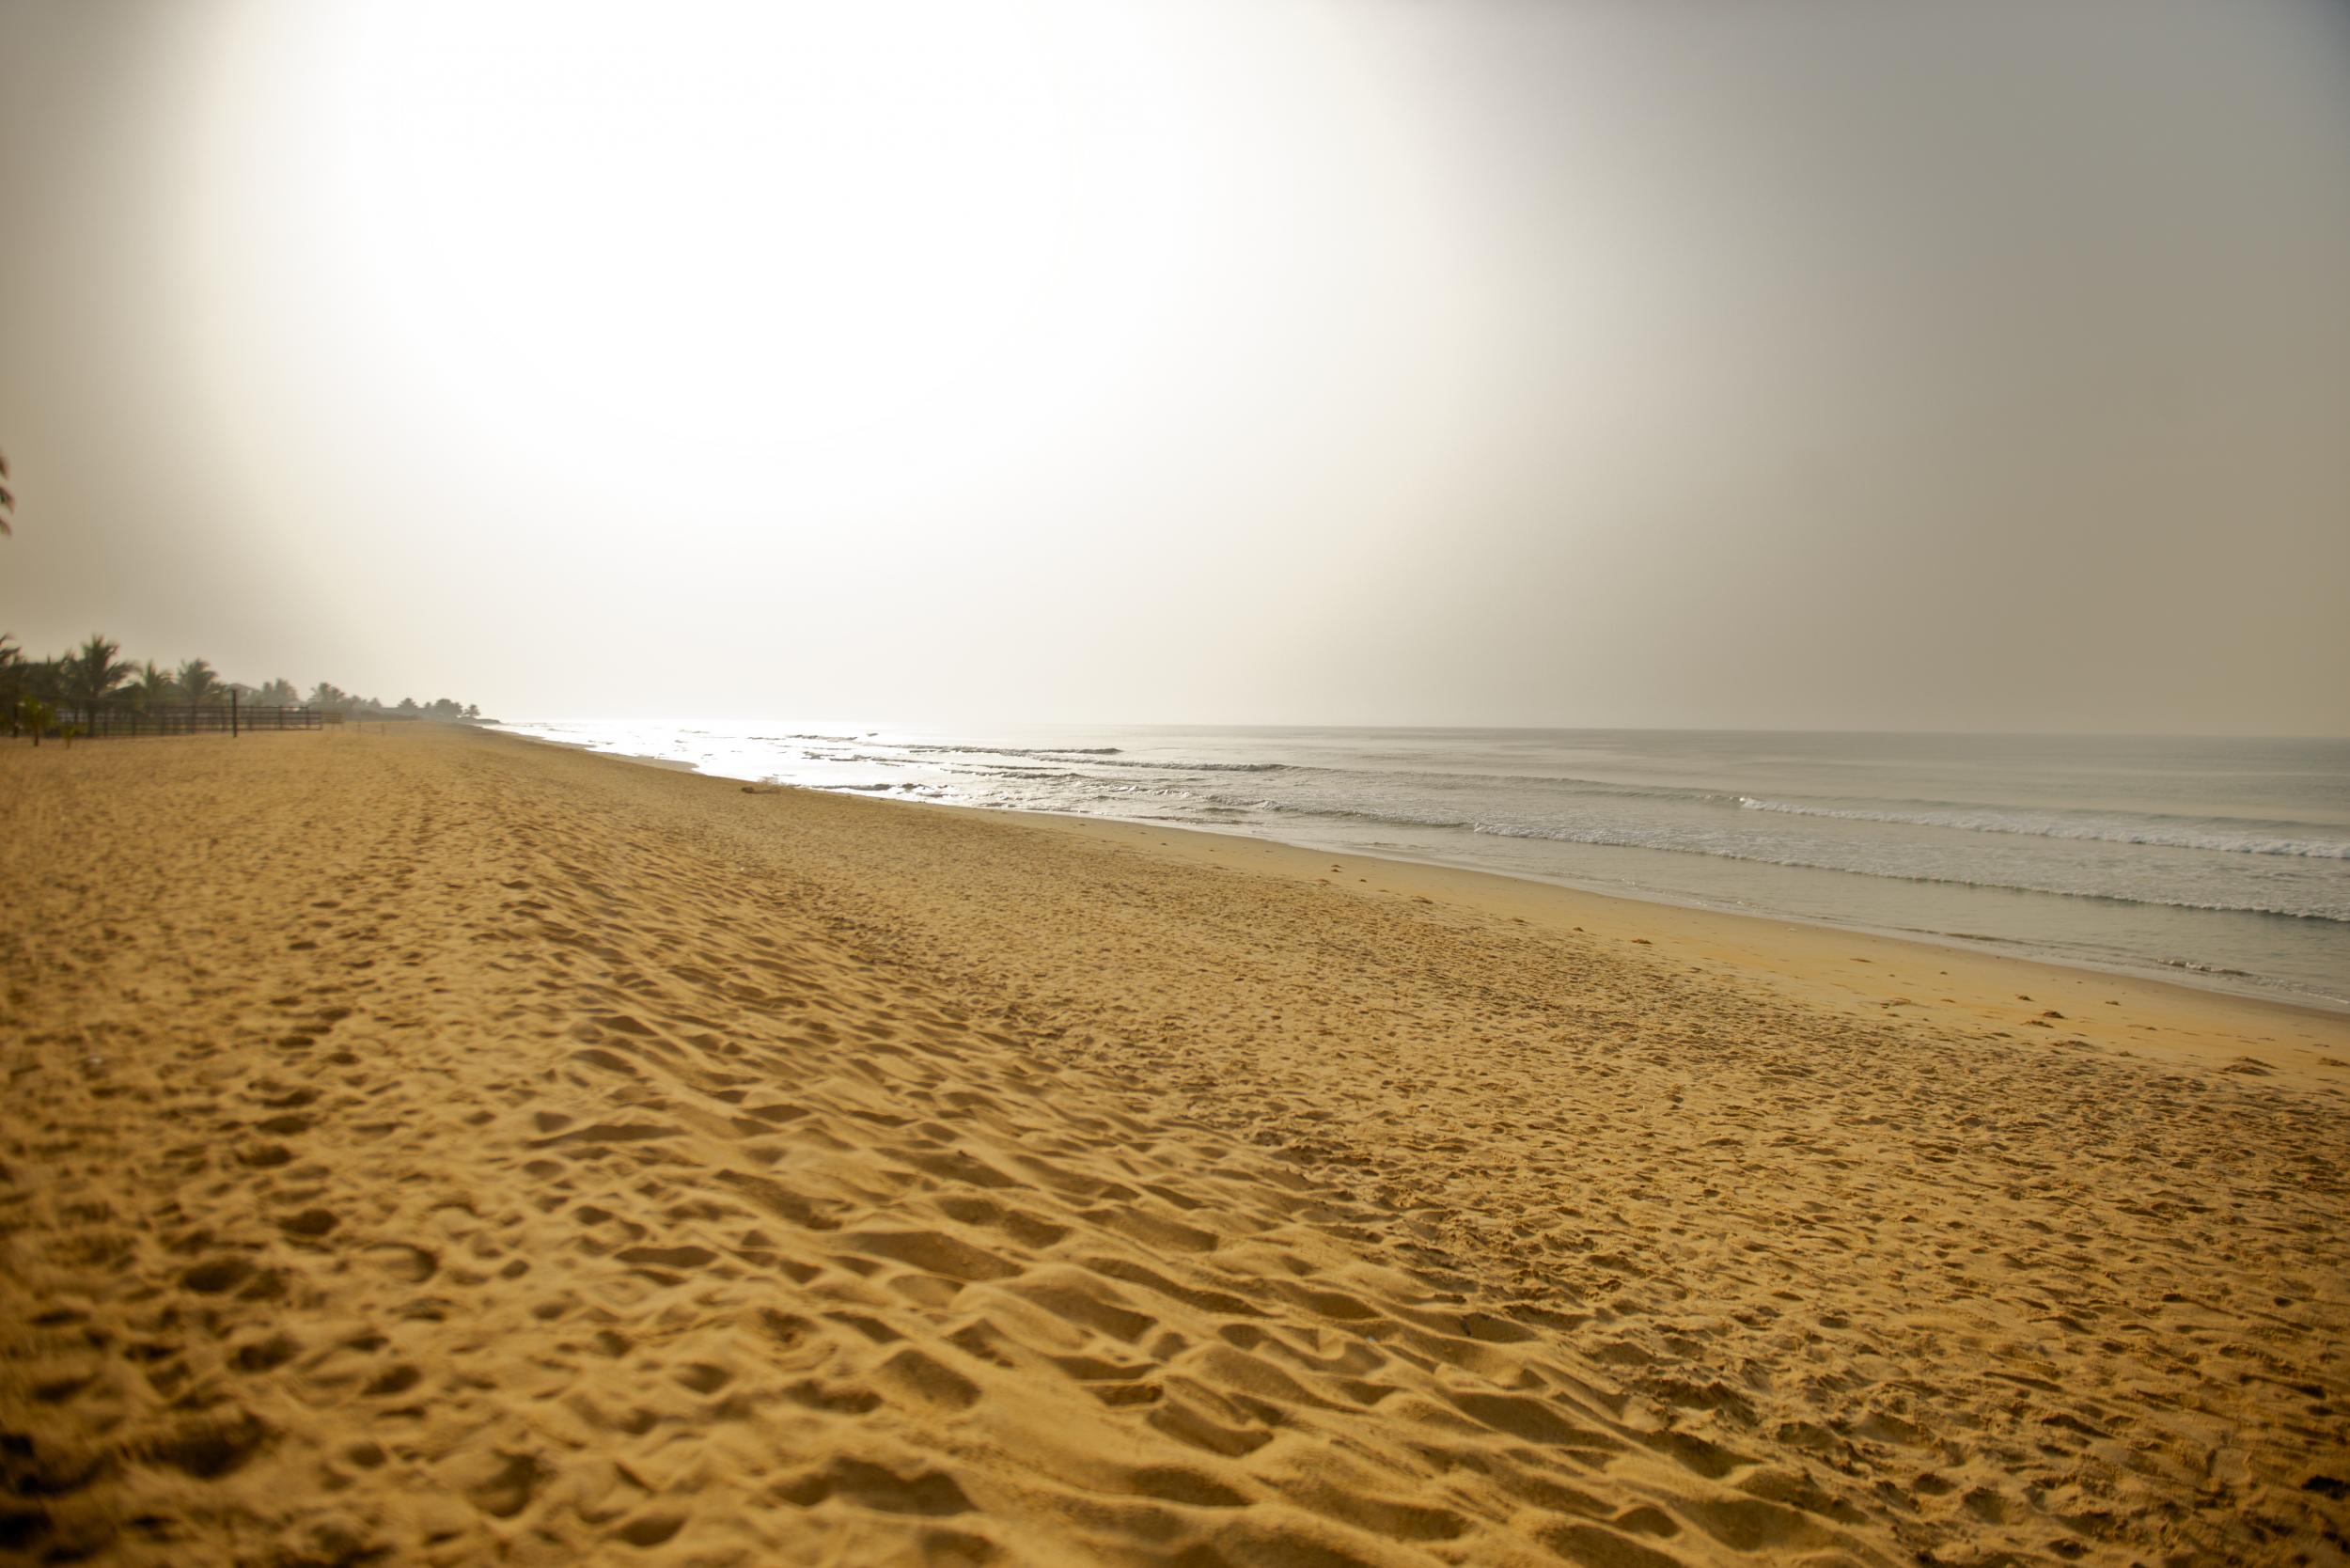 Liberia's beaches are some of West Africa's best